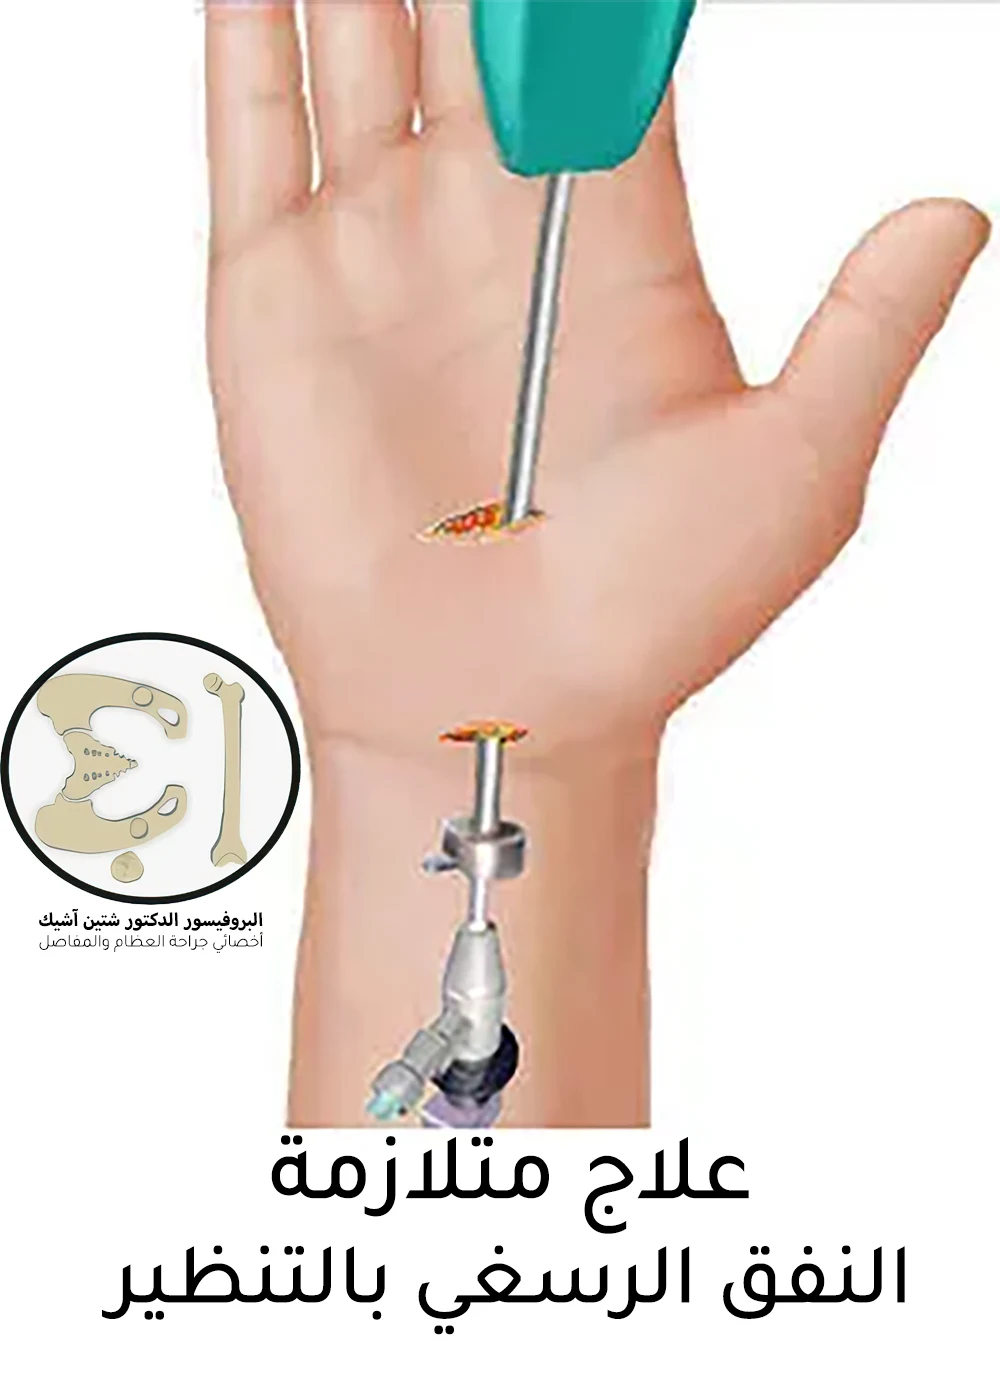 An image showing the endoscopic treatment of carpal tunnel syndrome